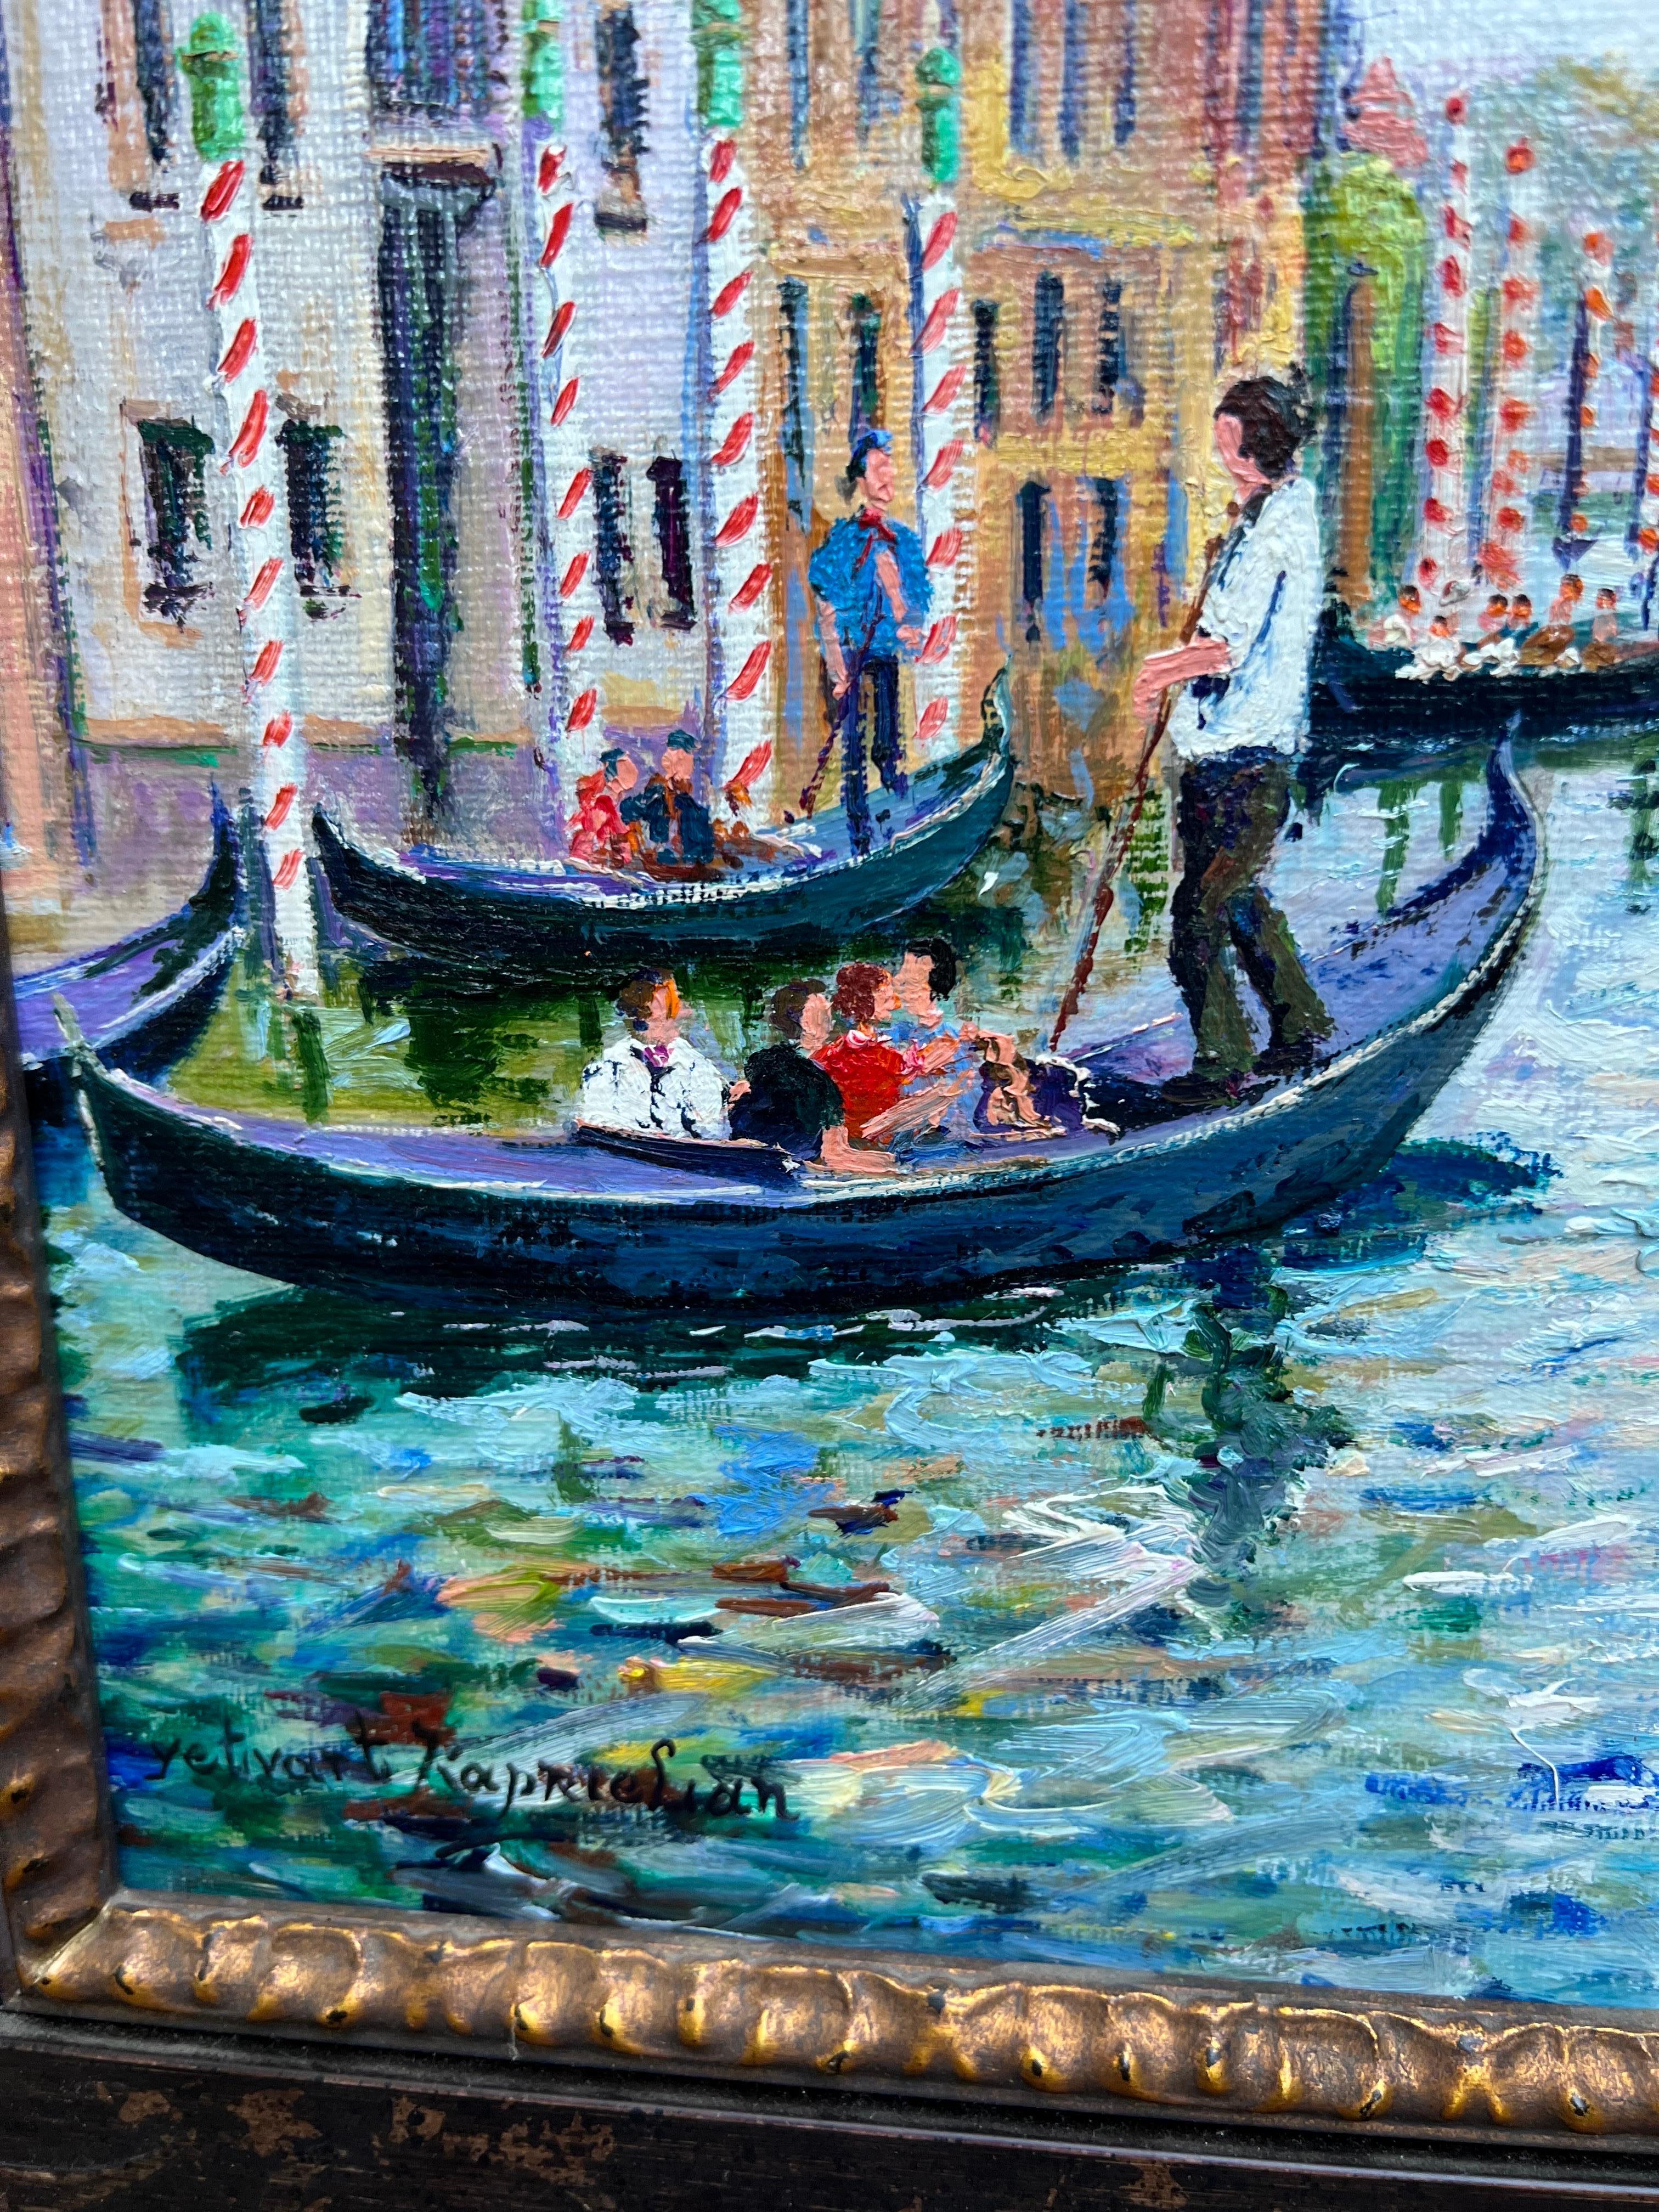 The Grand Canal in Venise. - Blue Landscape Painting by Yetvart Kaprielian